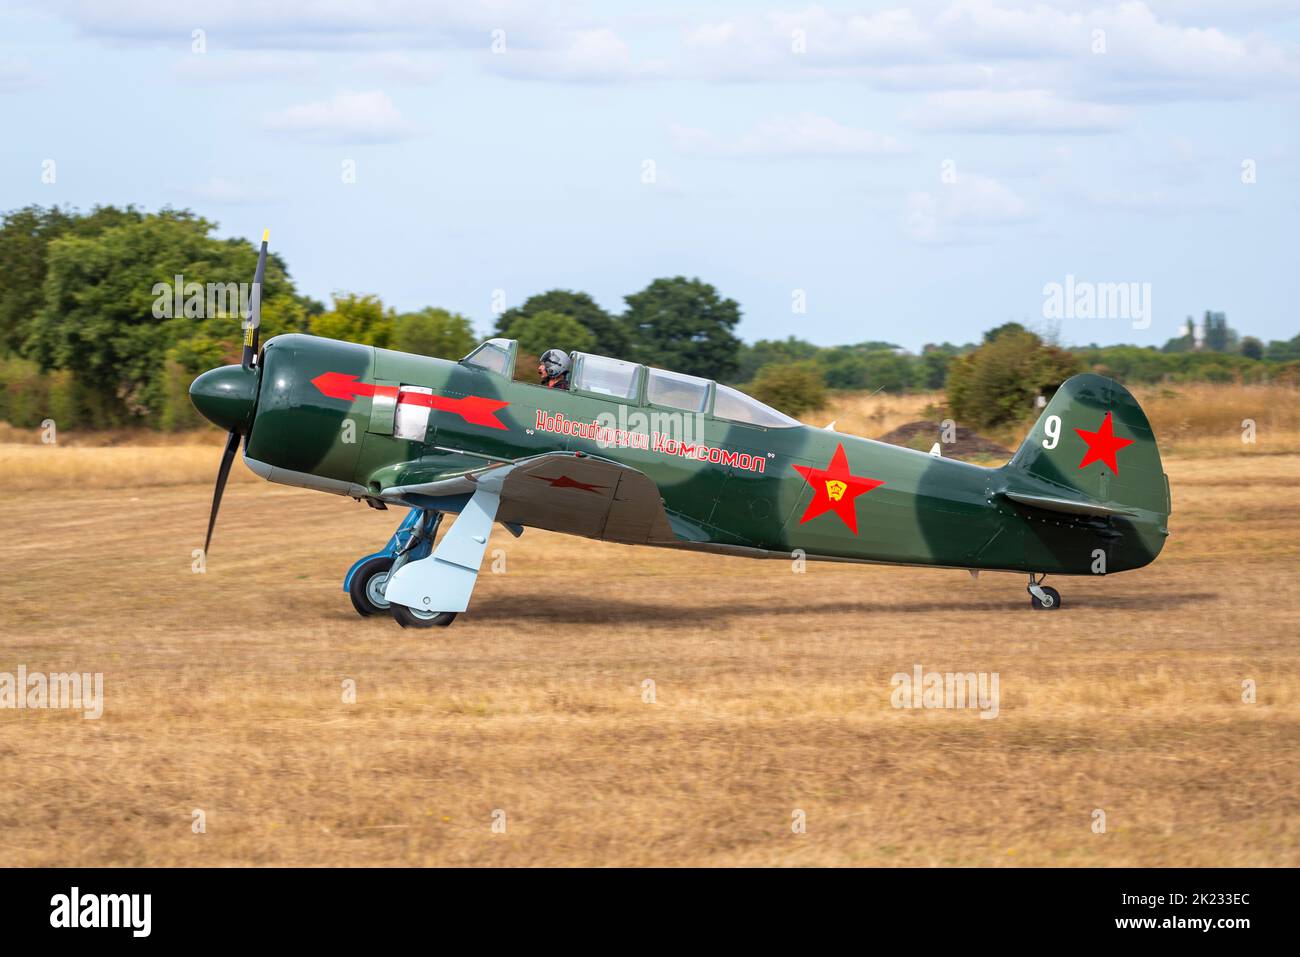 LET C.11 version of Yakovlev Yak-11 trainer plane at the Little Gransden Air and Car show, Bedfordshire, UK. G-OYAK white 9 Russian red star scheme Stock Photo